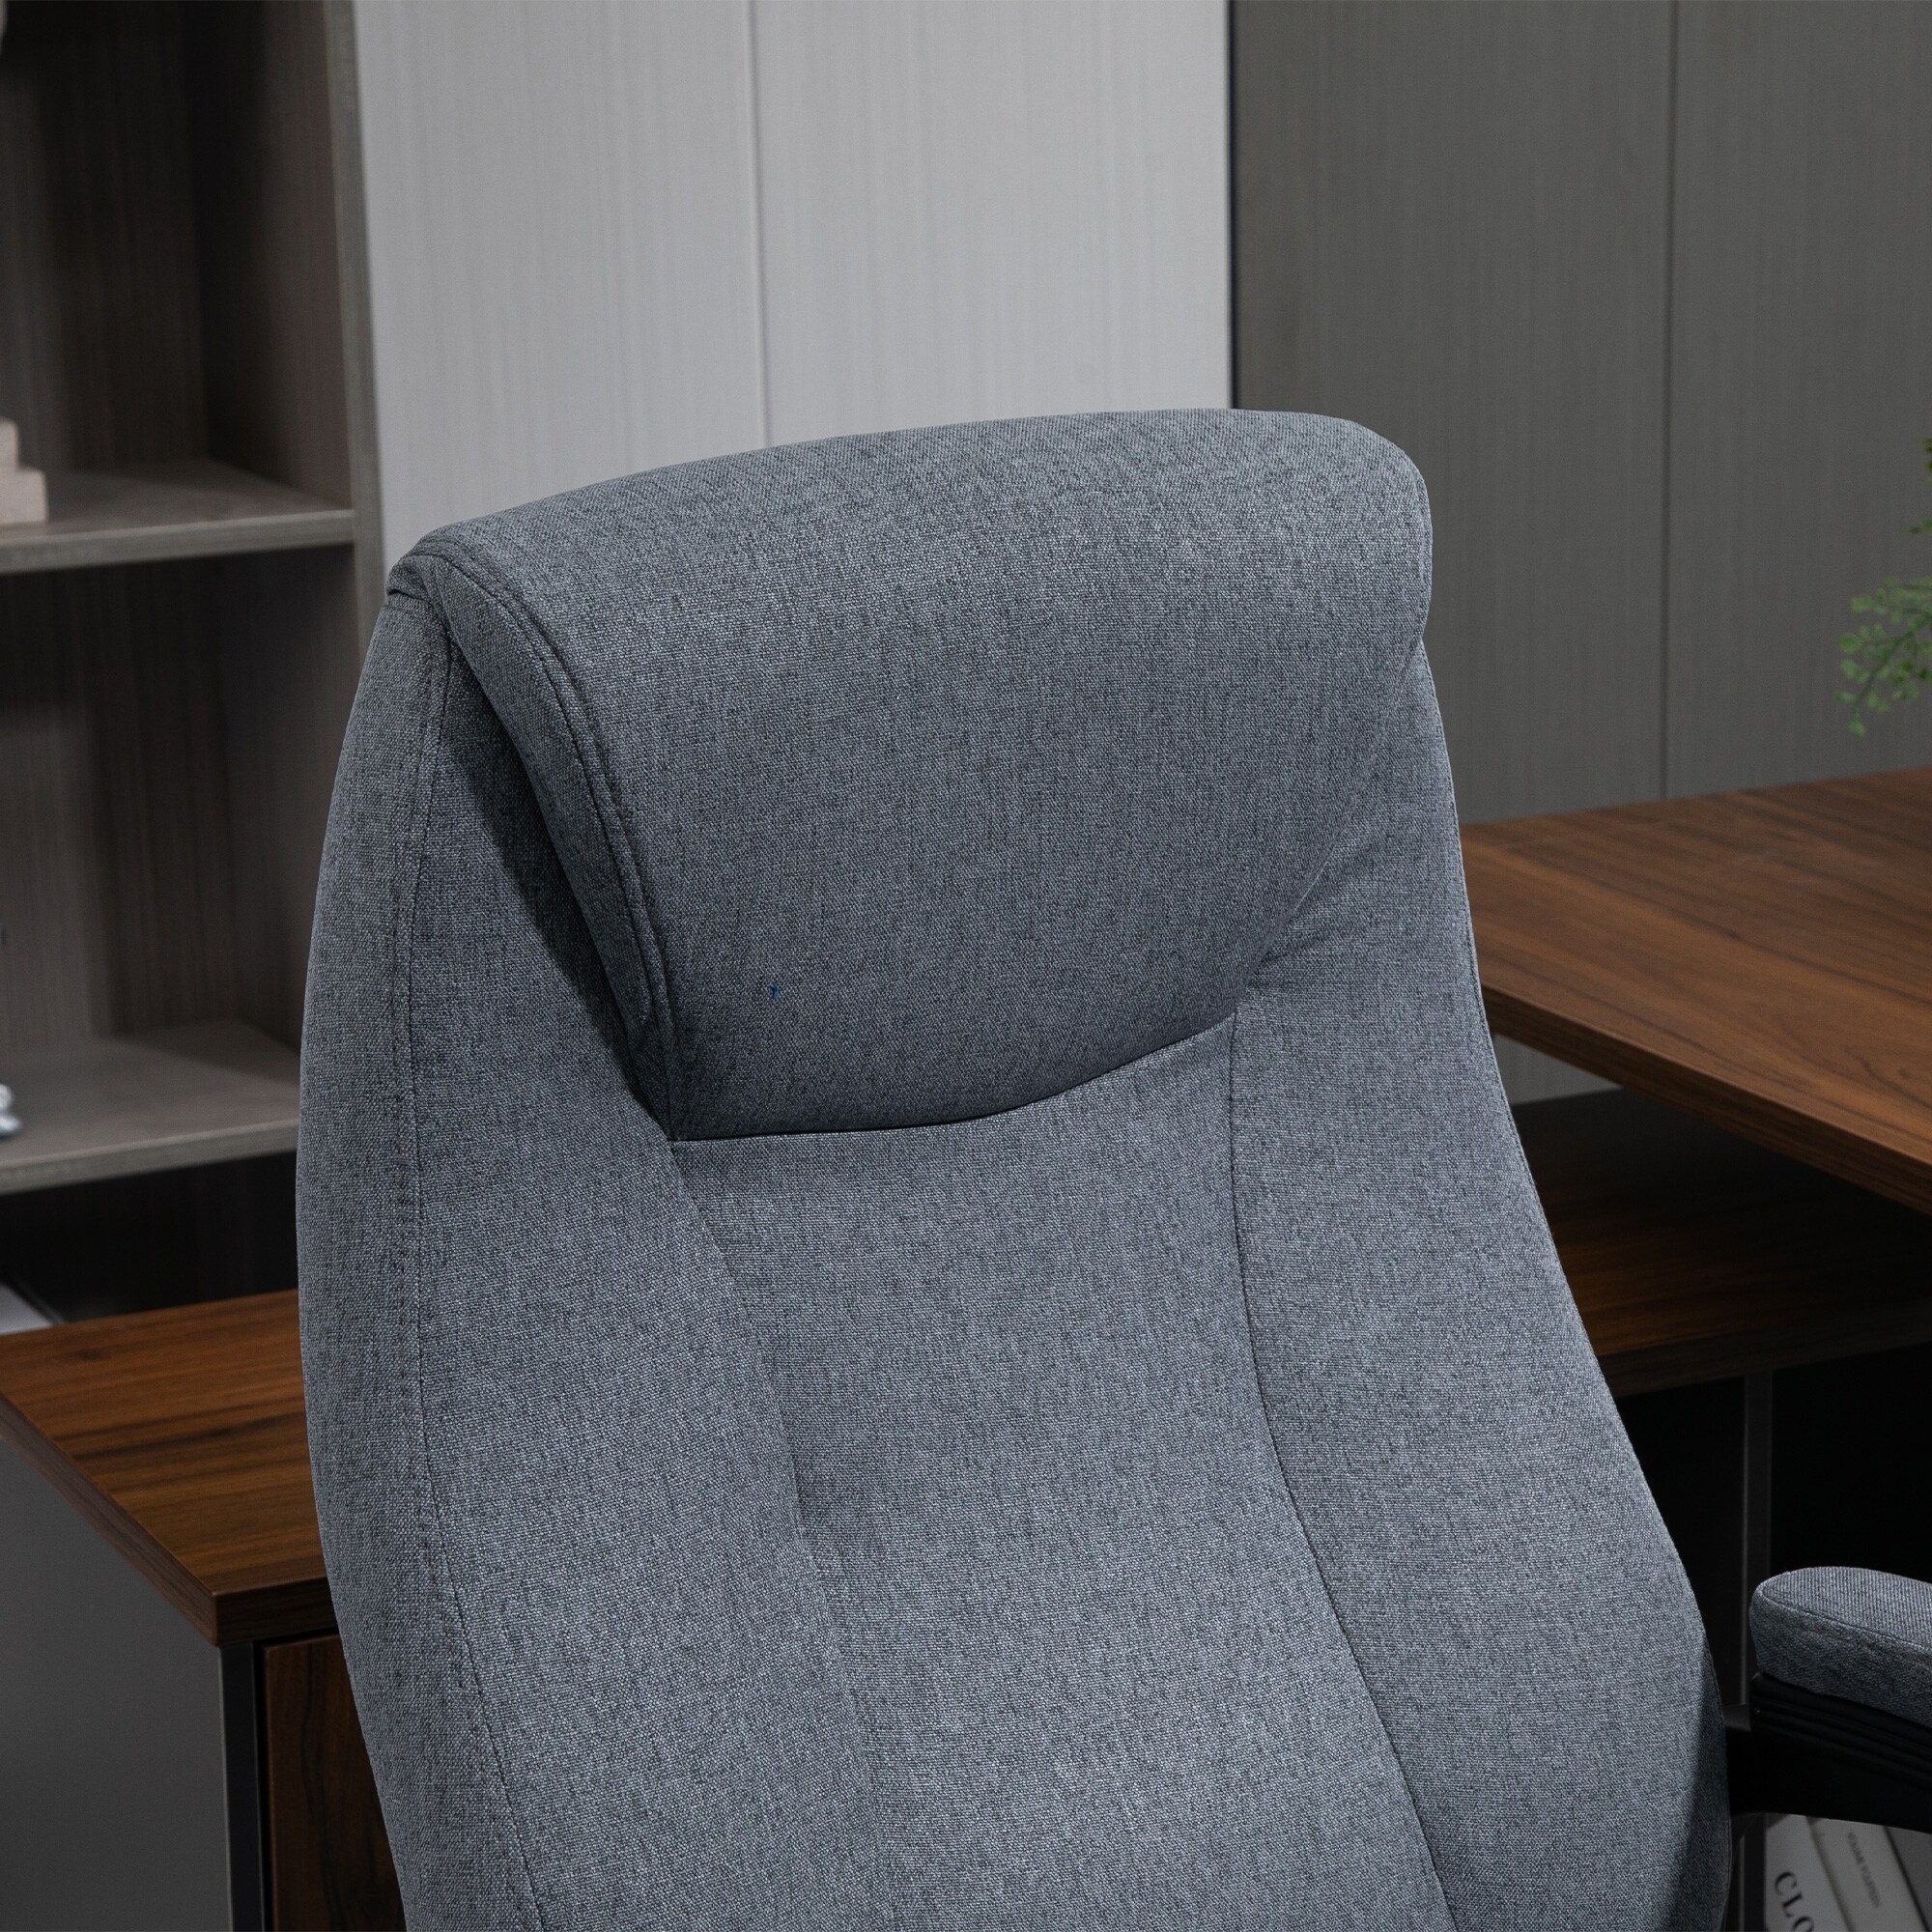 https://ak1.ostkcdn.com/images/products/is/images/direct/a0878b21f2adc548309a9d84ce84bbfe4e1ff0fe/Vinsetto-Ergonomic-Office-Chair-Adjustable-Height-Linen-Fabric-Rocker-360-Swivel-Task-Seat%2C-Grey.jpg